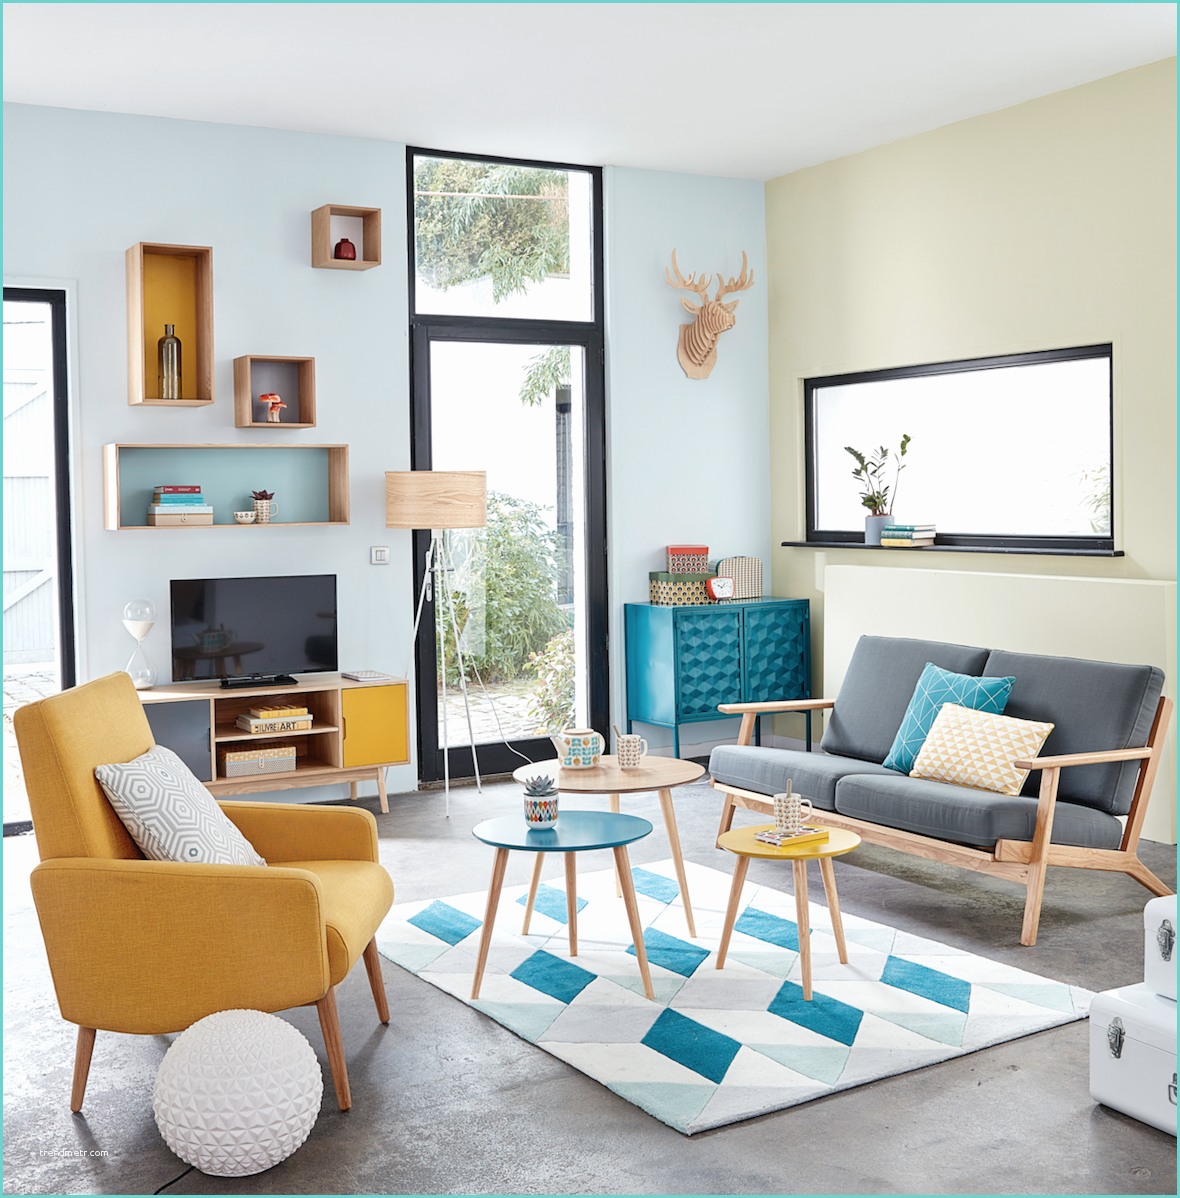 Bz Maison Du Monde the 5 Best Colours for A Happy Home According to An